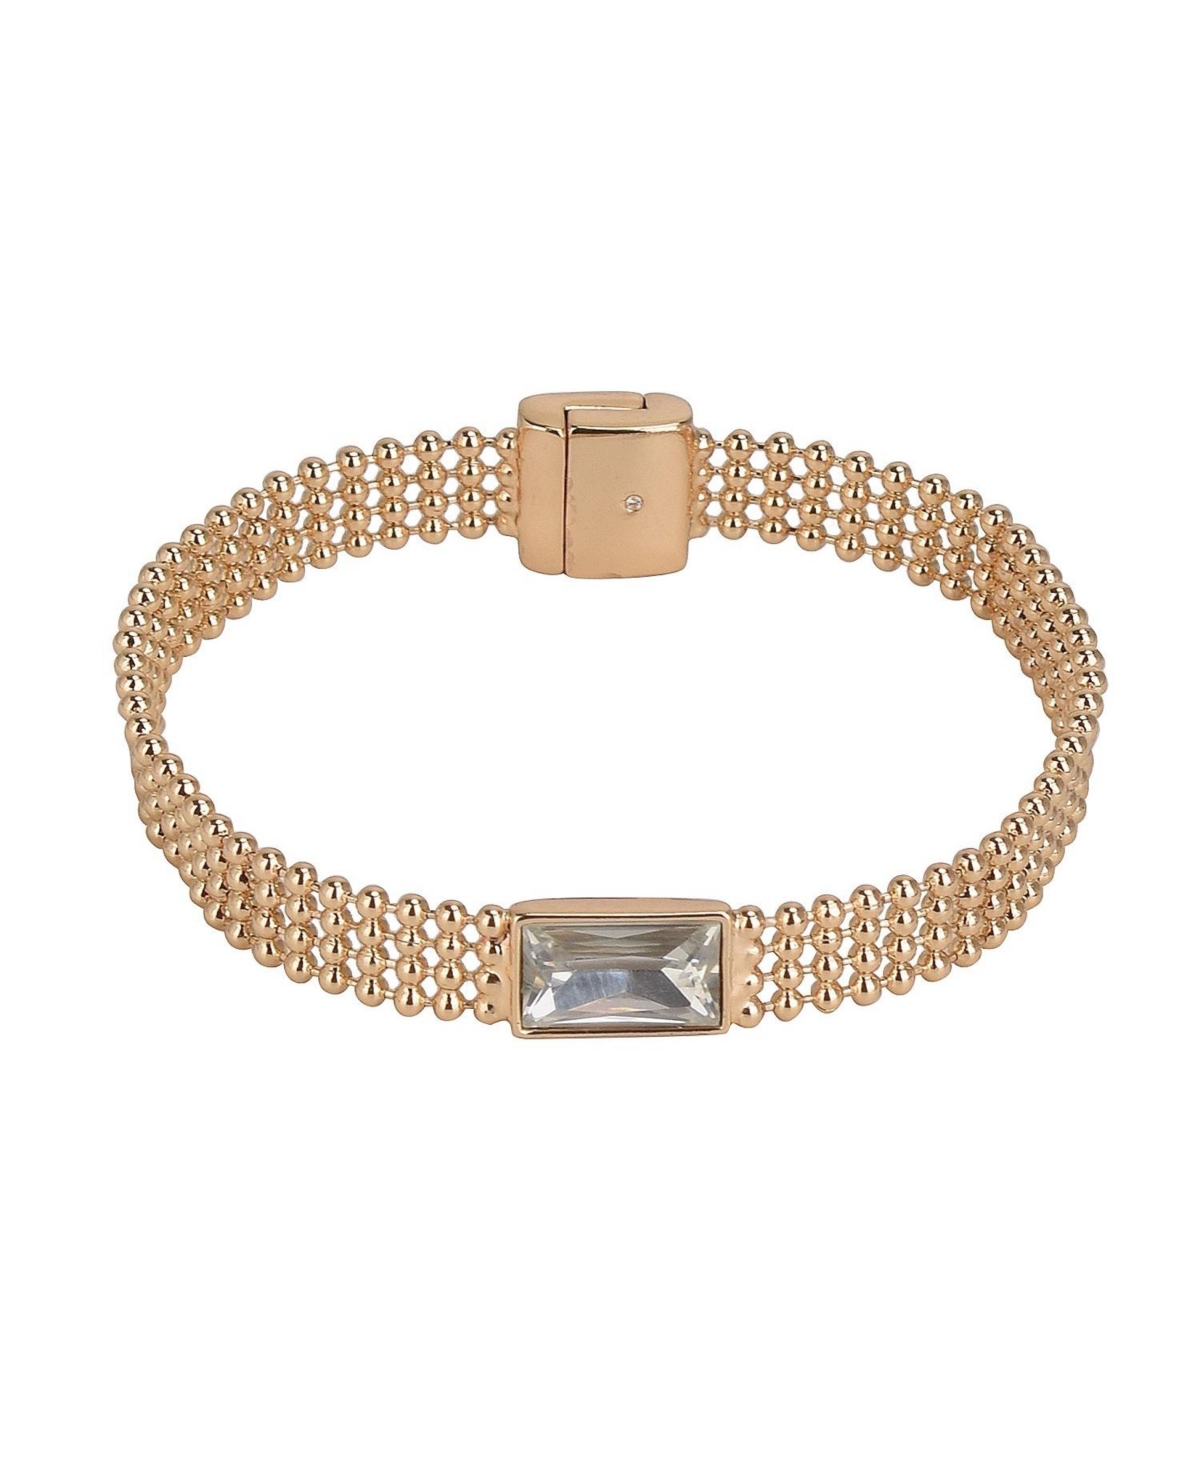 Gold Tone Bead Chain Bracelet with Magnetic Closure and Center Stone Accent - Gold